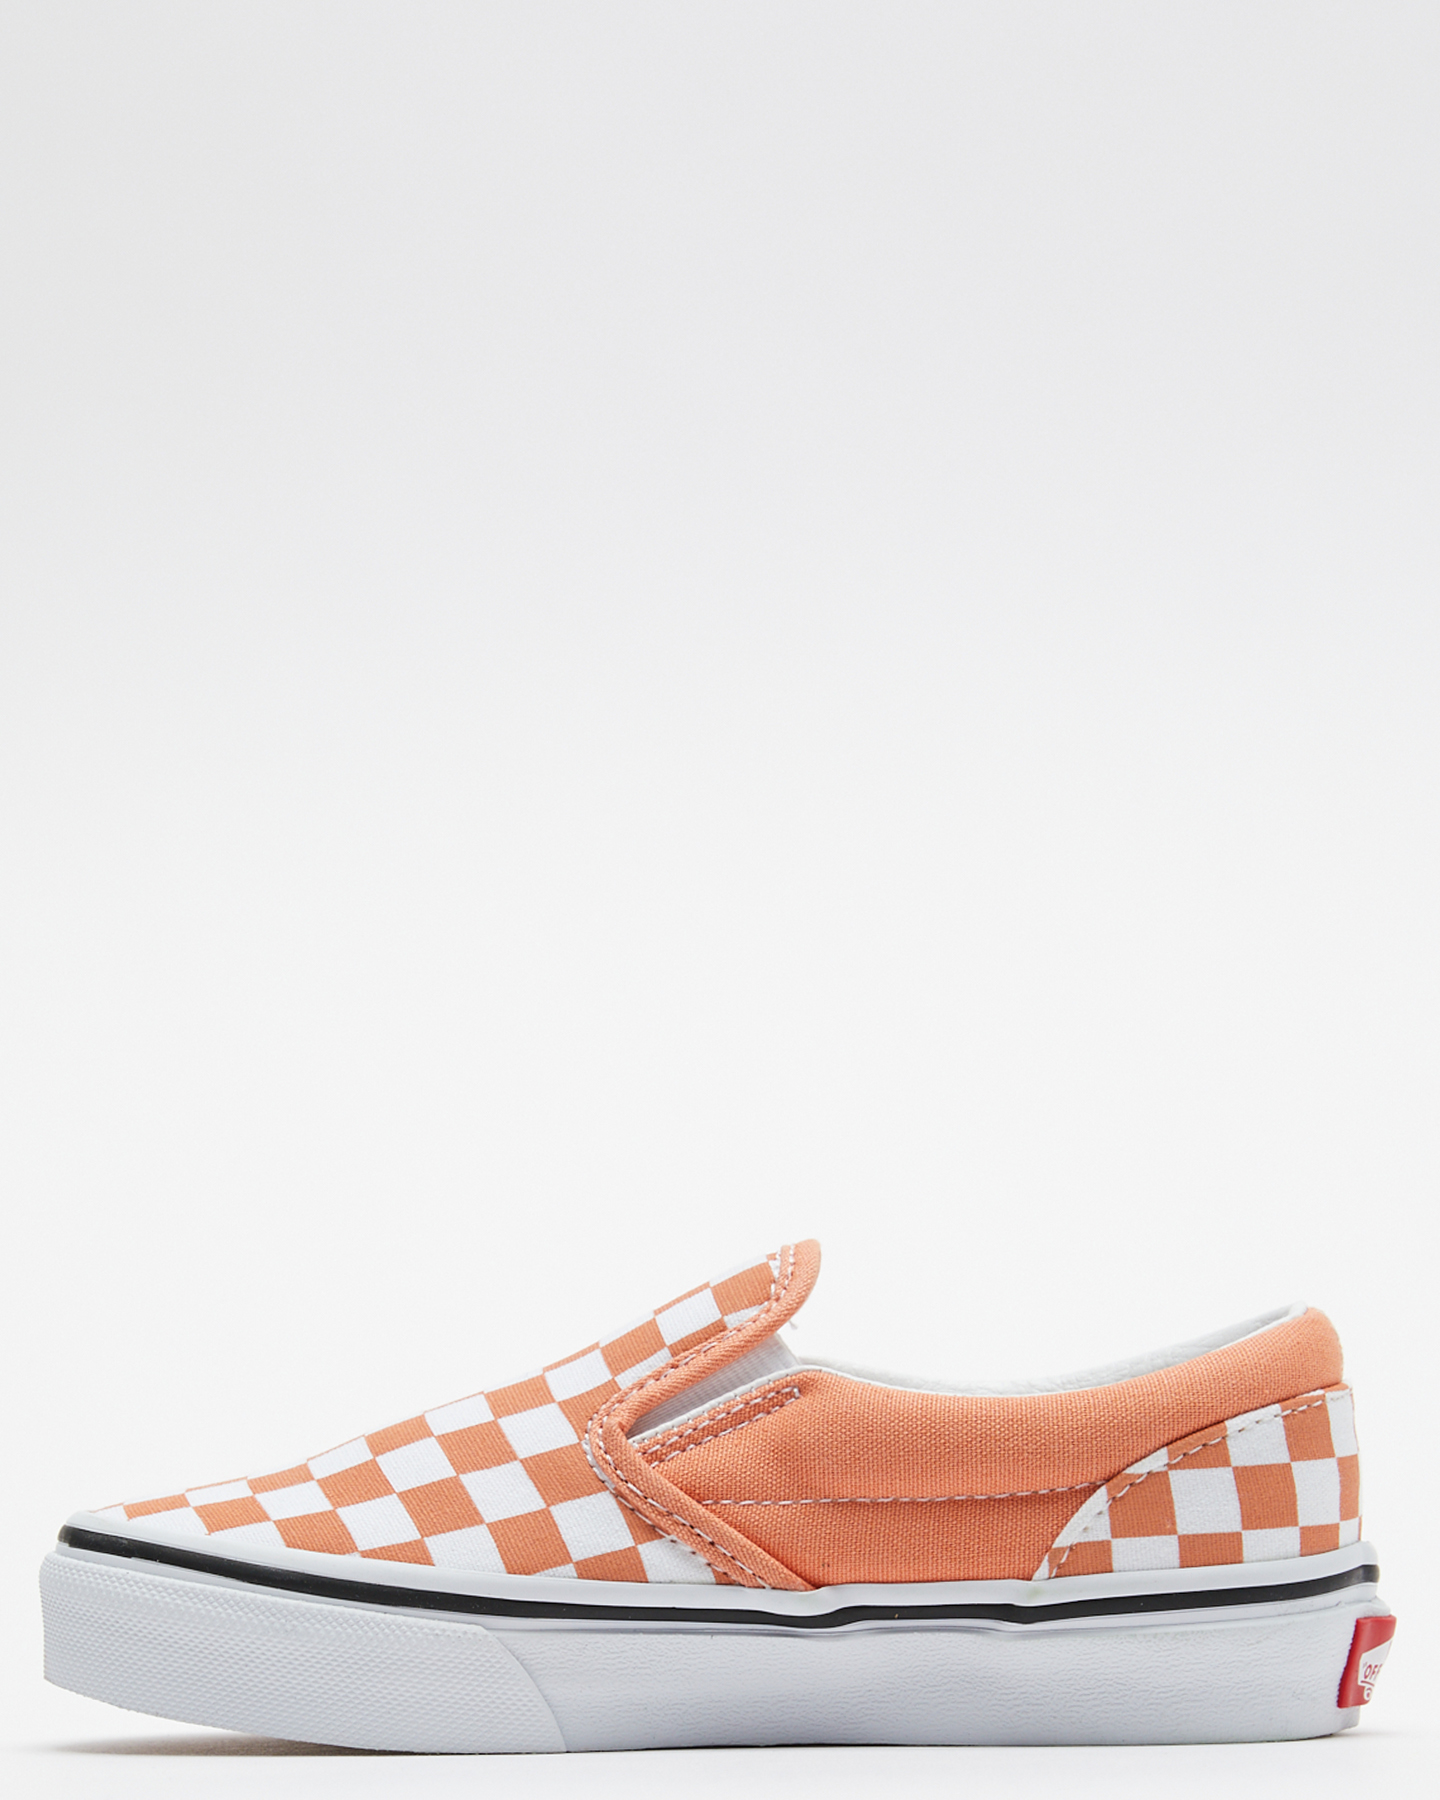 Vans Classic Slip-On Color Theory Checkerboard Sun Baked - Orange